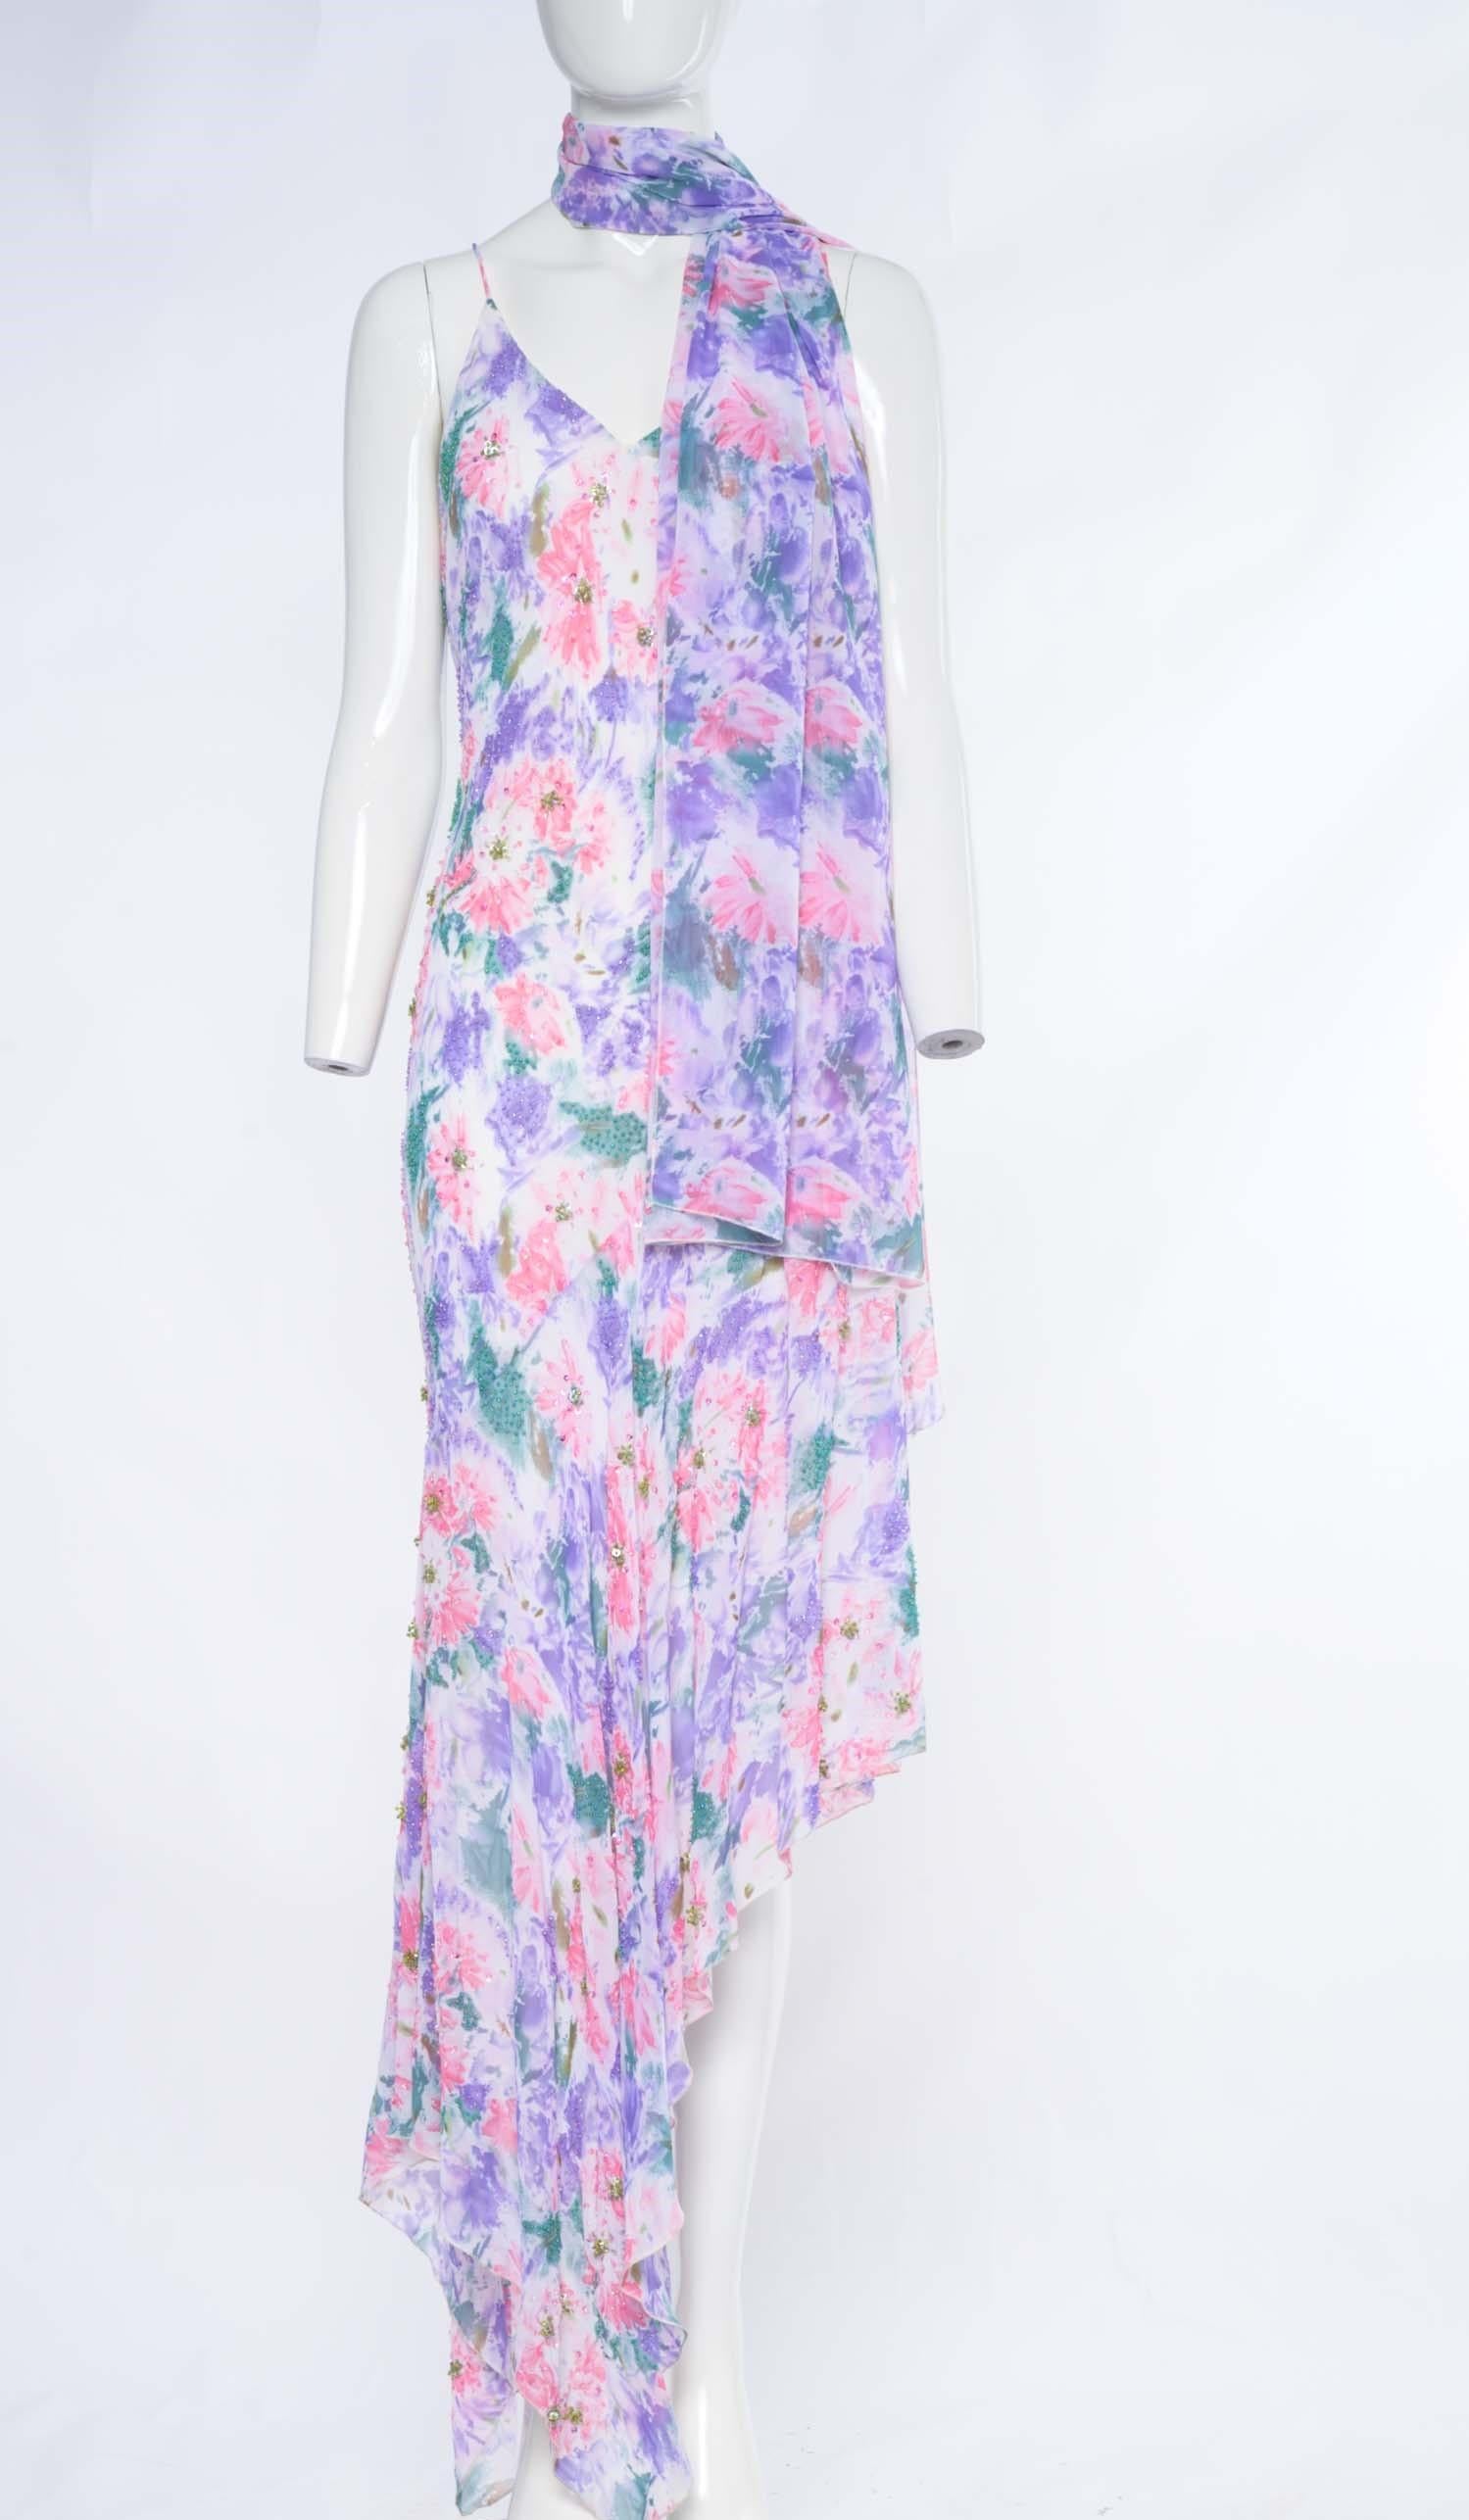 2000s Diane Freis Hand Beaded Floral Print Asymmetric Dress In Excellent Condition For Sale In Hong Kong, HK